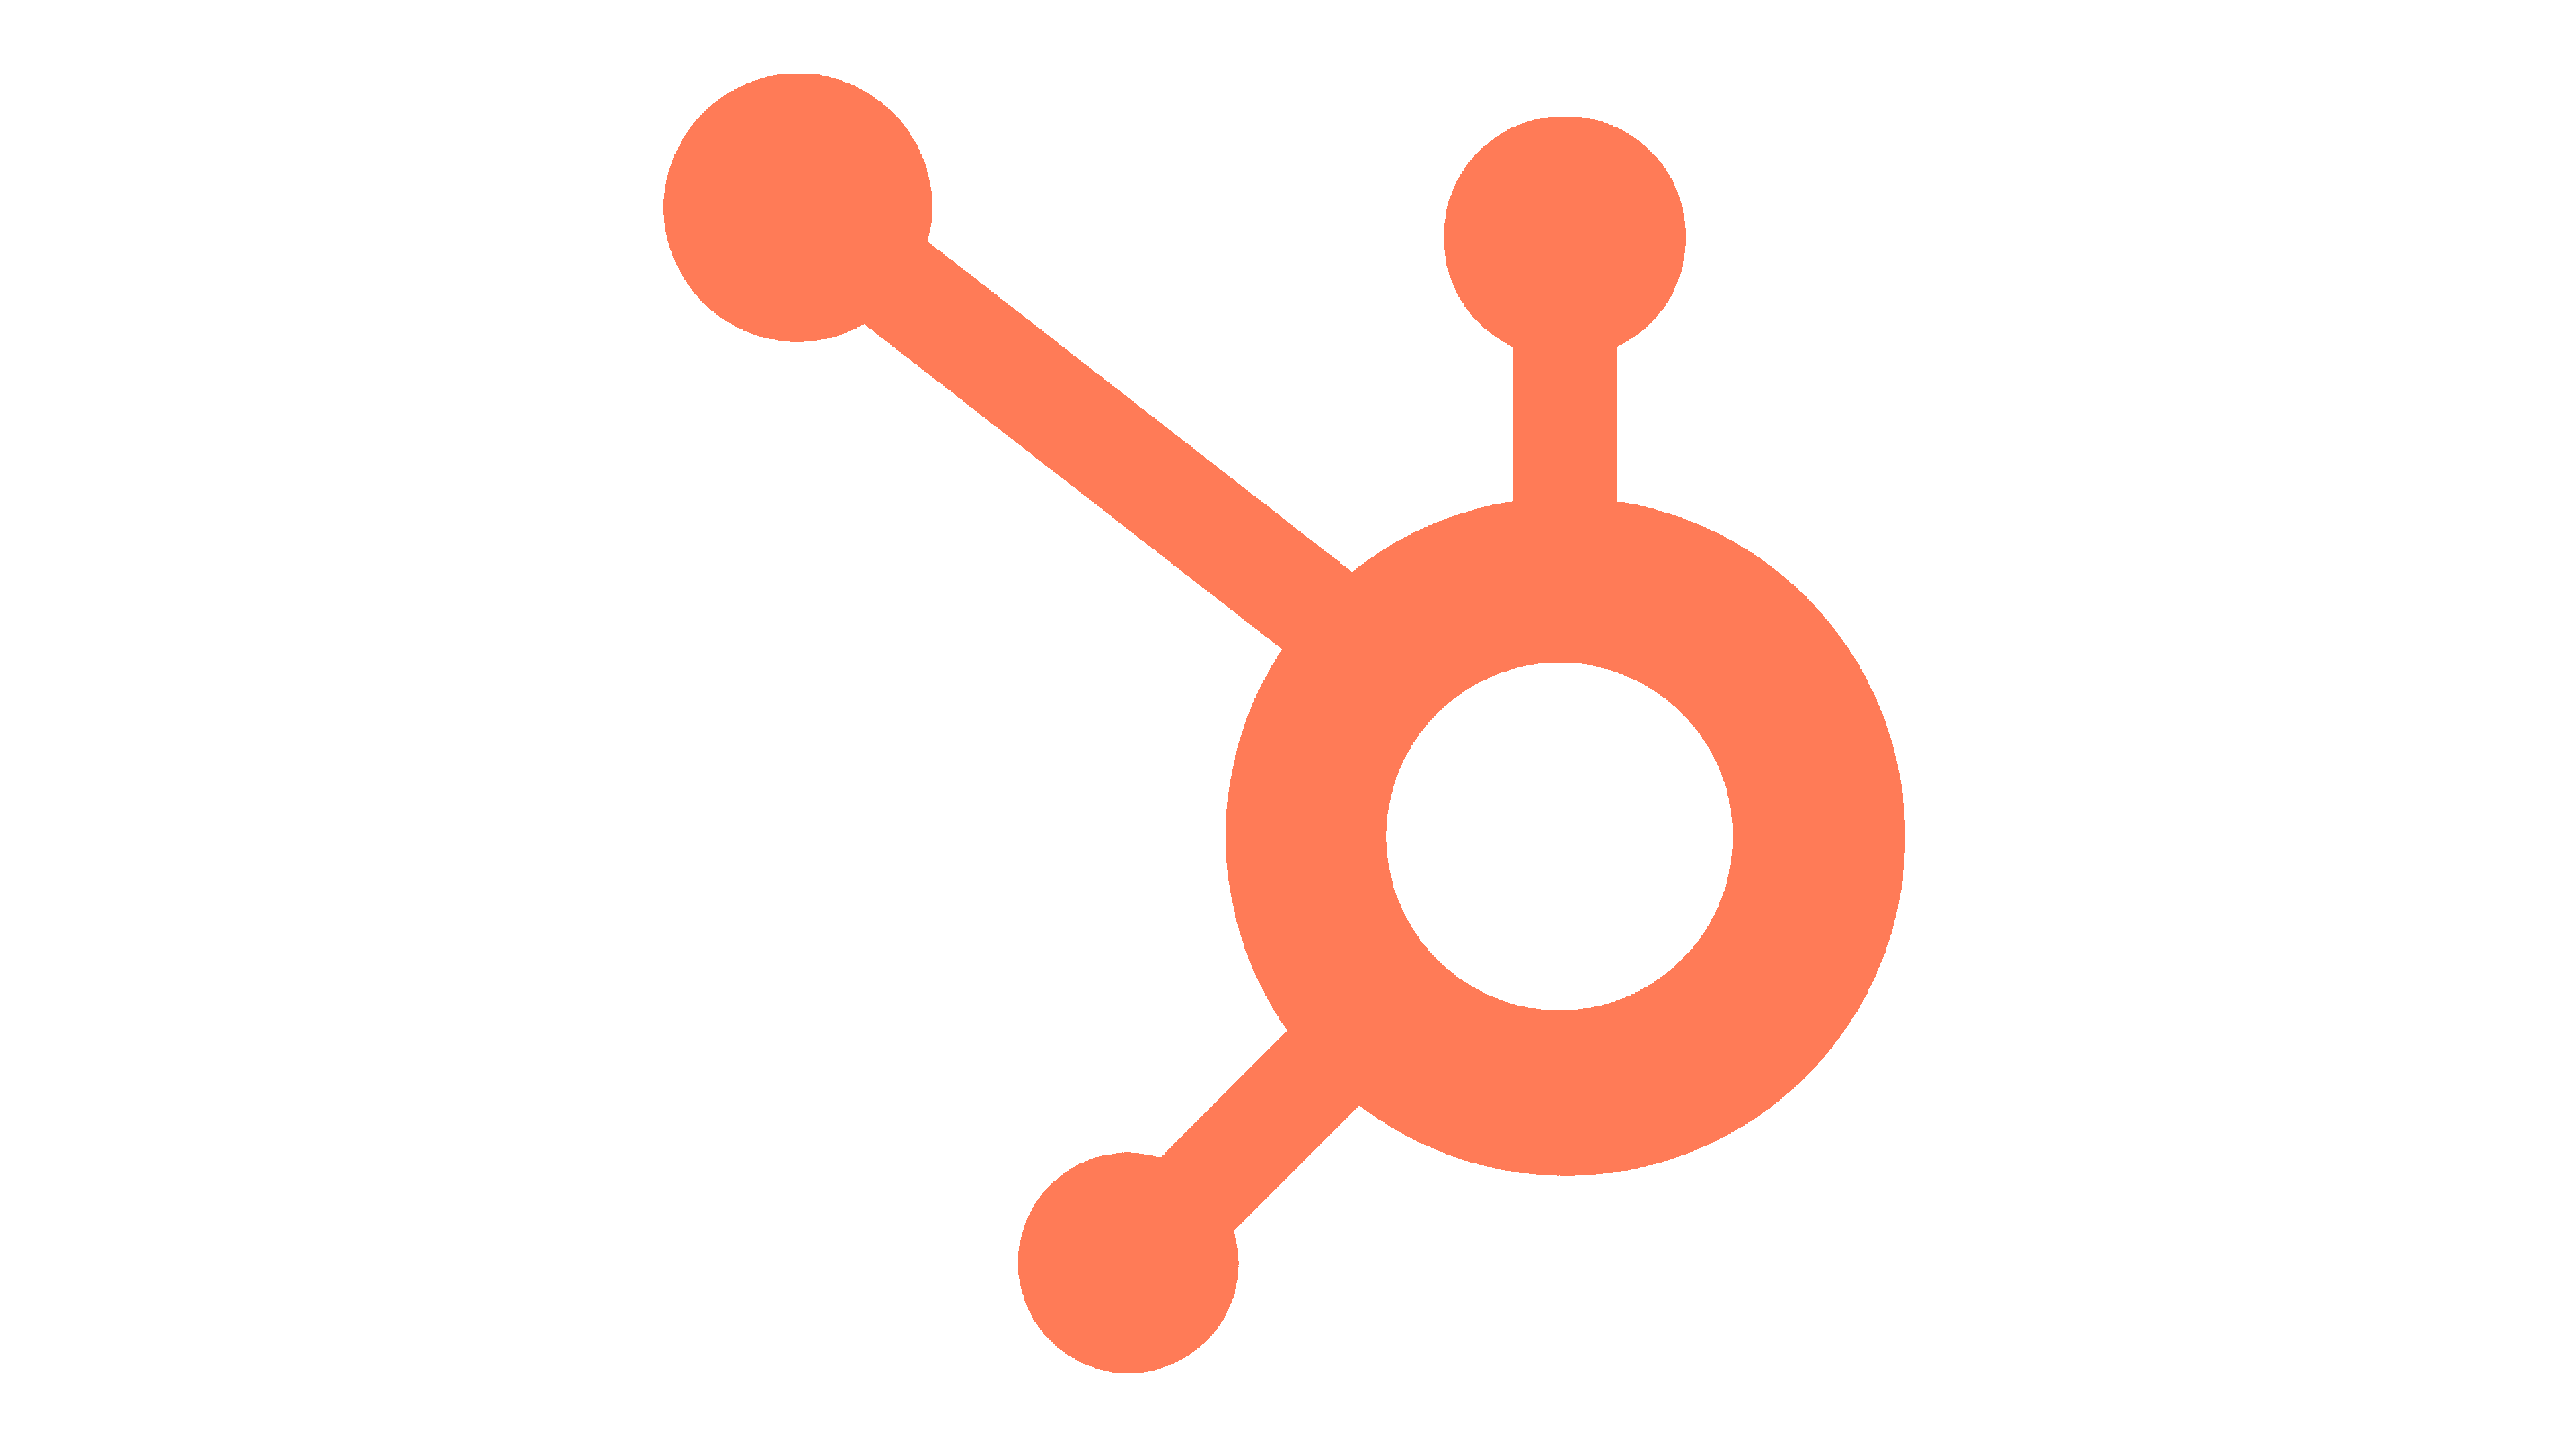 Connect with CRM APIs like HubSpot